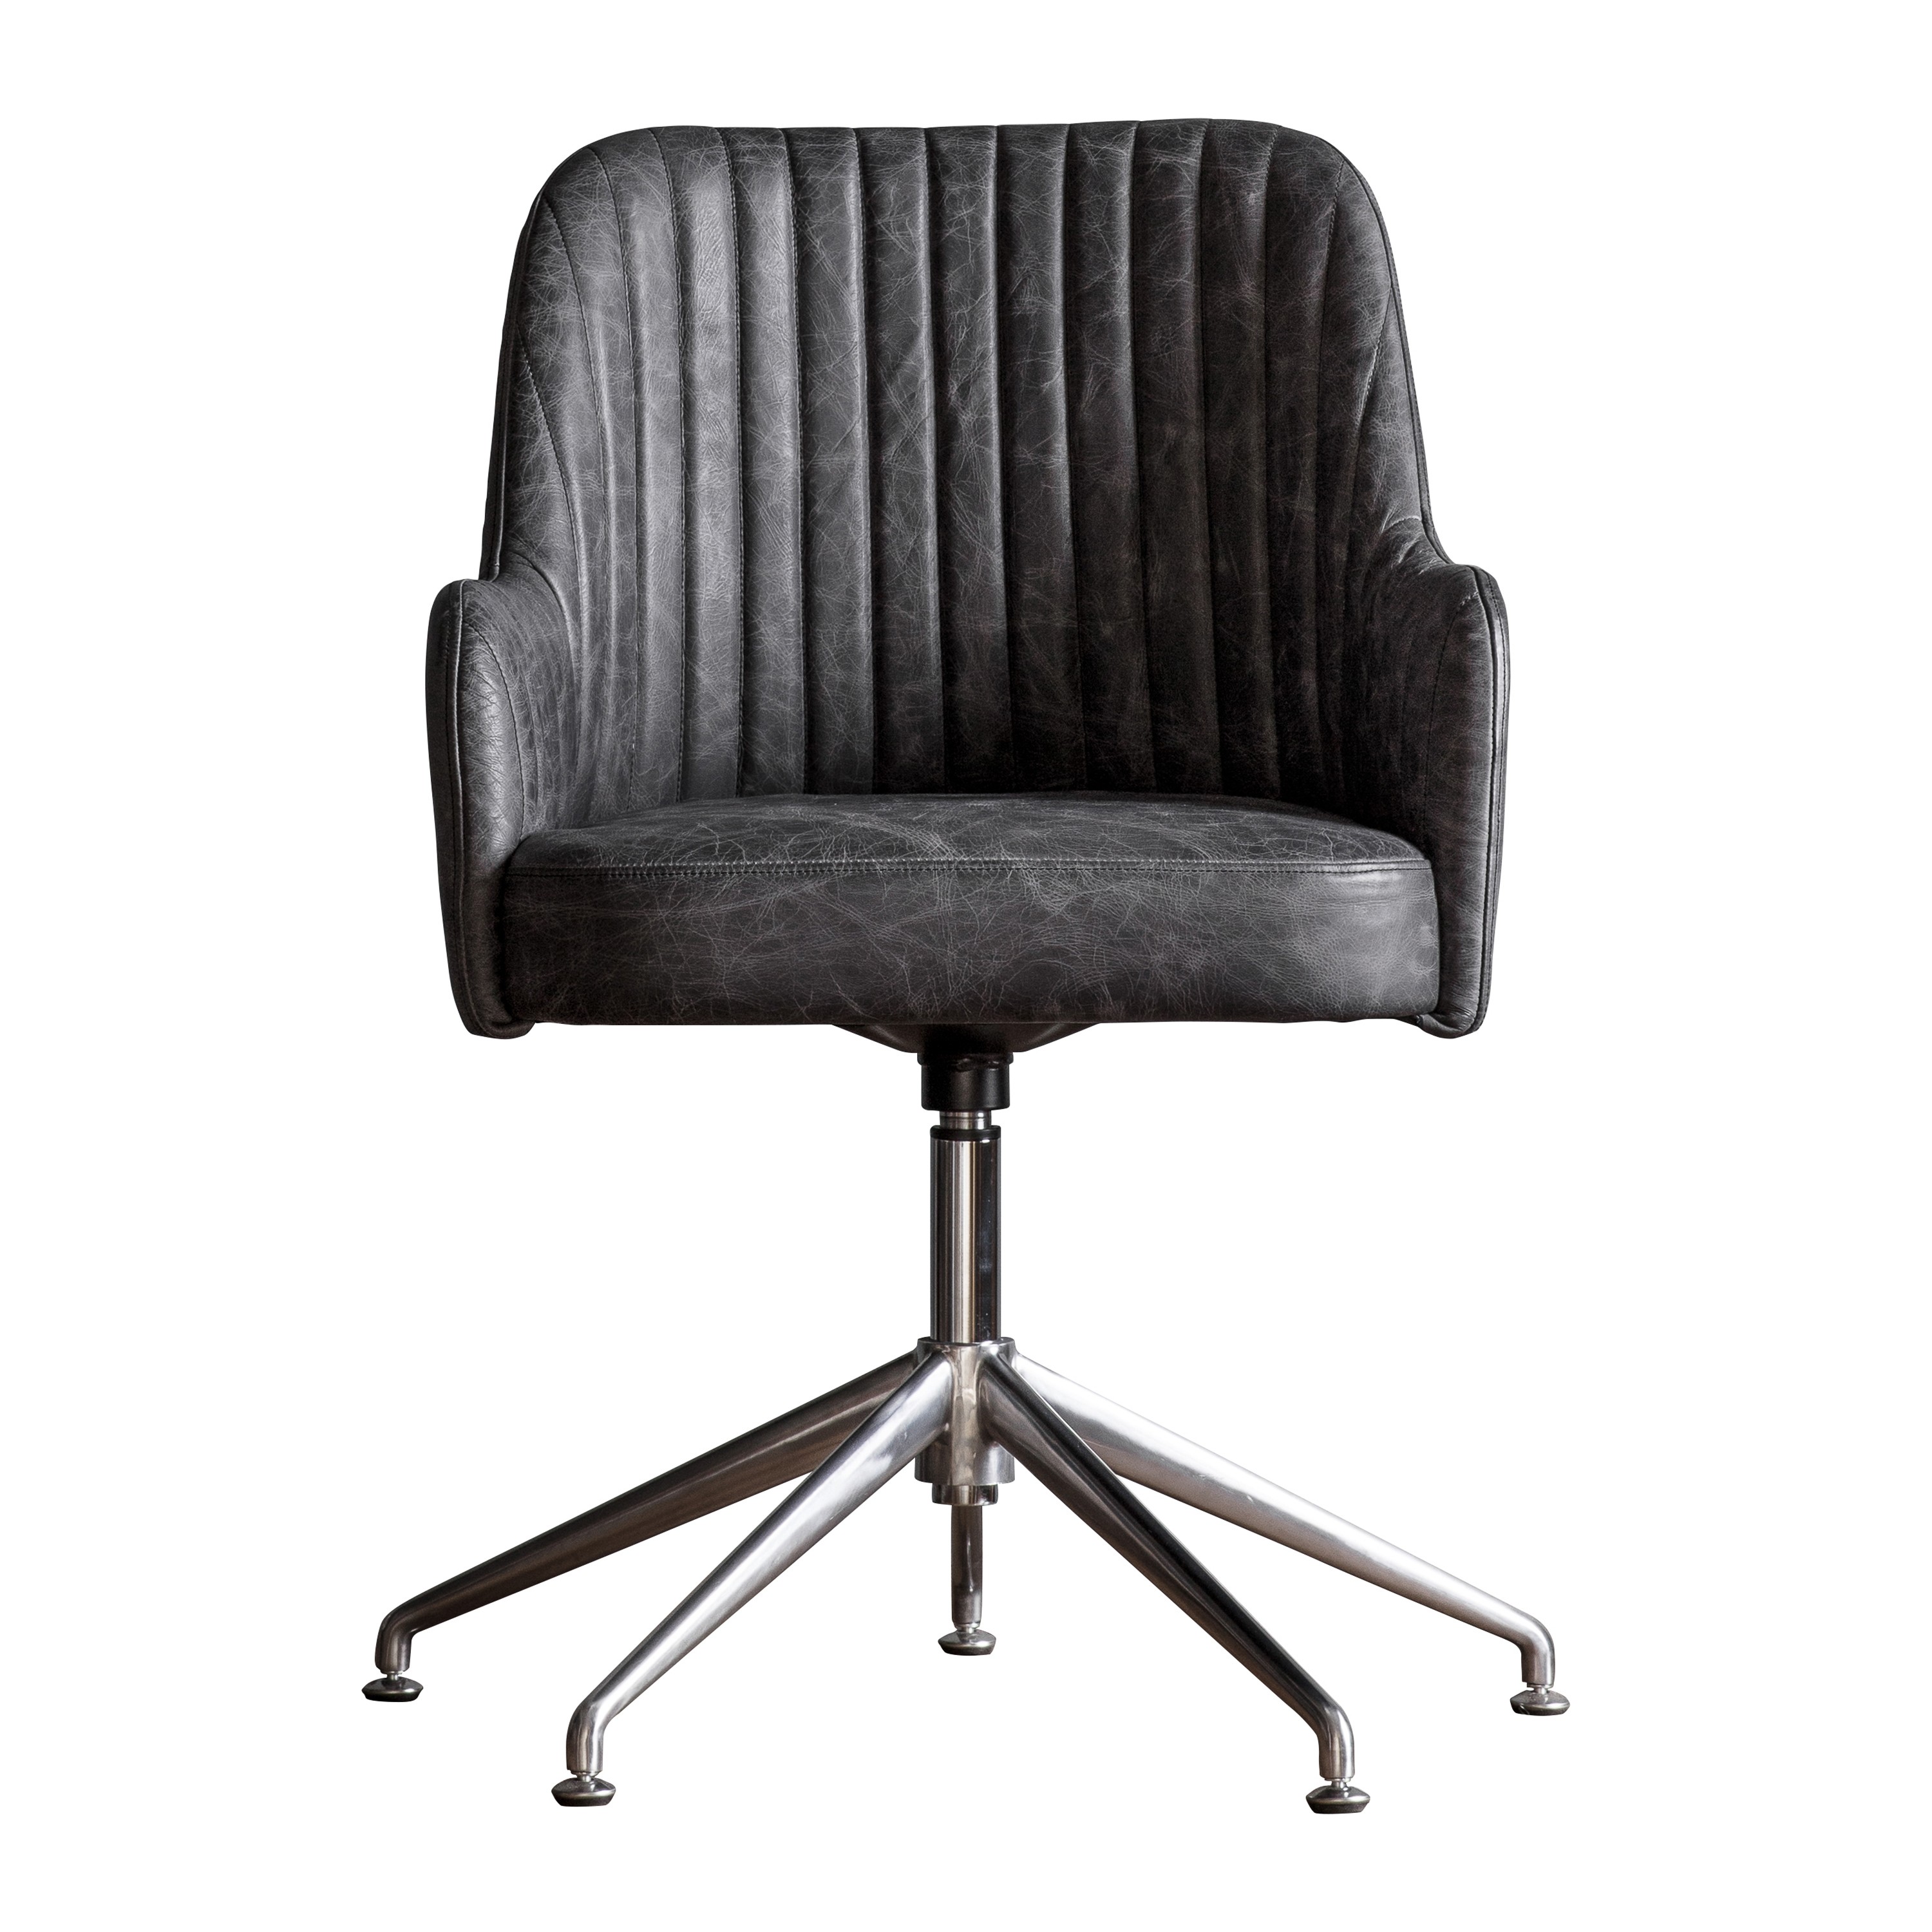 Curie Swivel Chair Antique Ebony